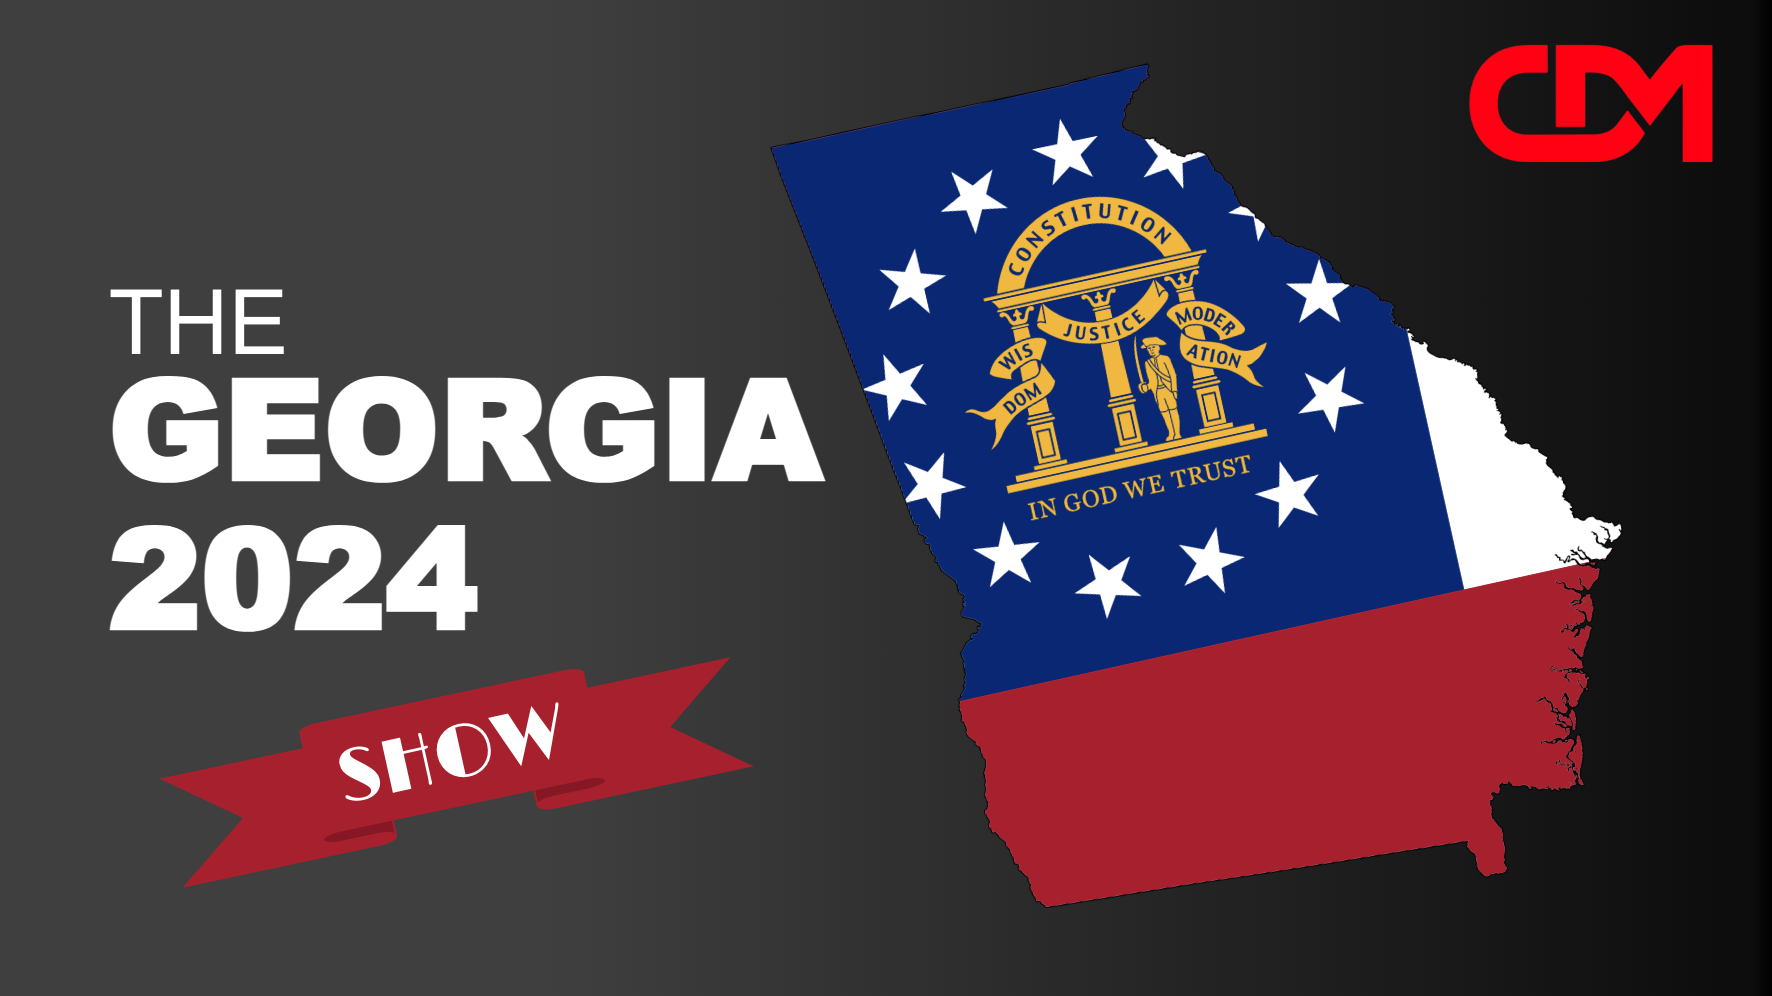 LIVE 7pm EST: The Georgia 2024 Show! With Stephanie Endres, CDM Espanyol's Willie Lora, And Mallory Staples